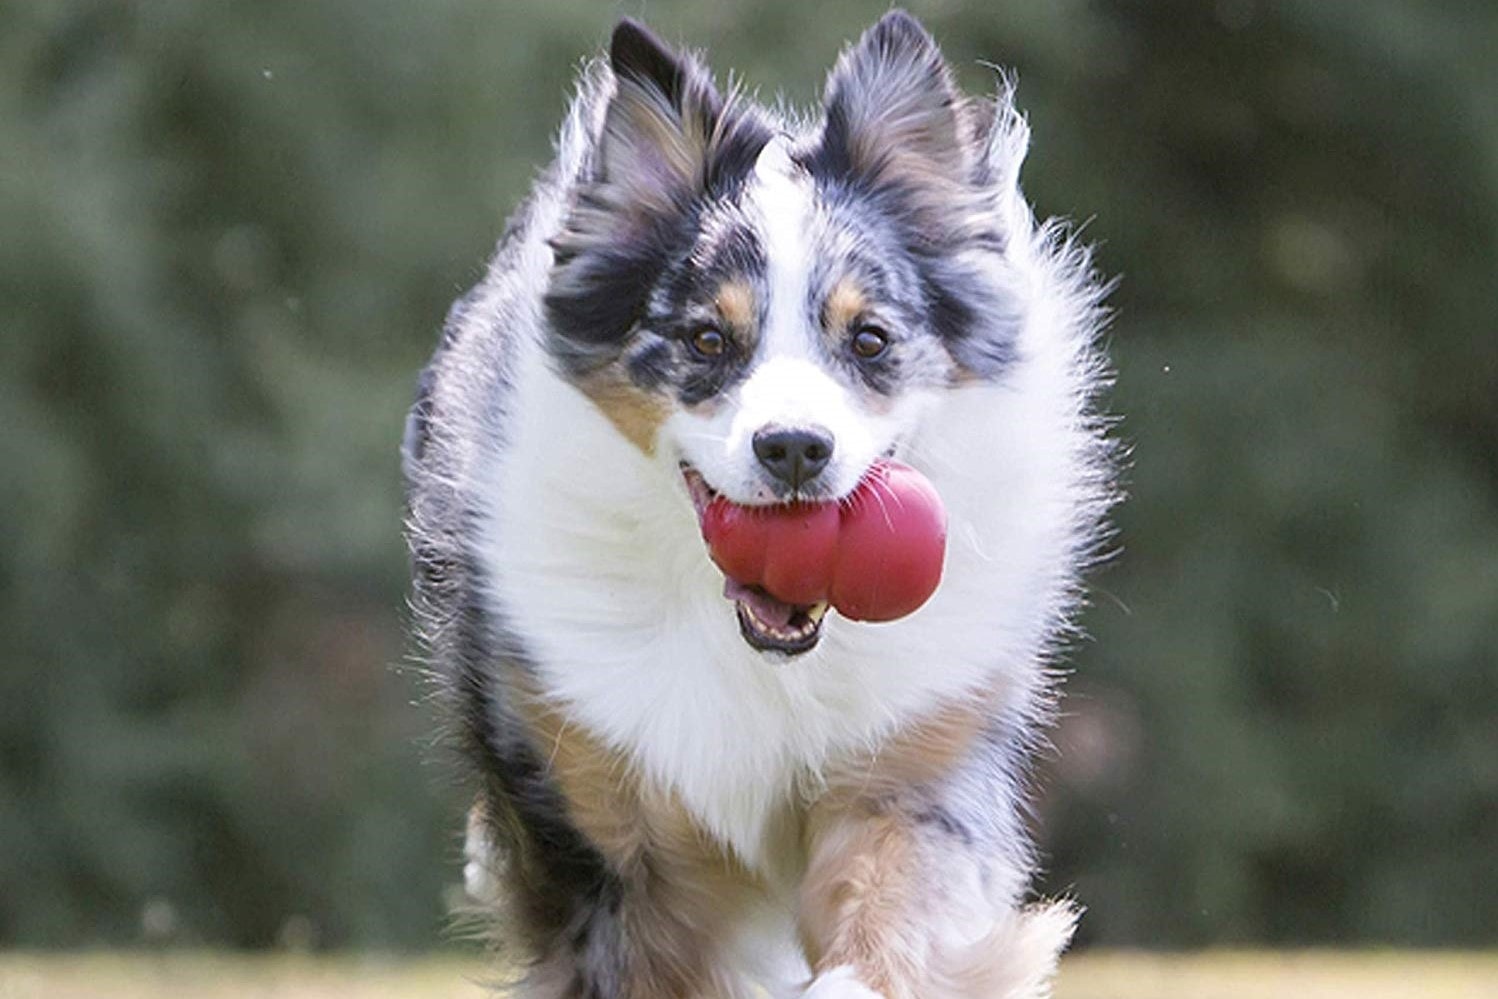 Top 10 Best Dog Toys Of 2019 (Reviews)